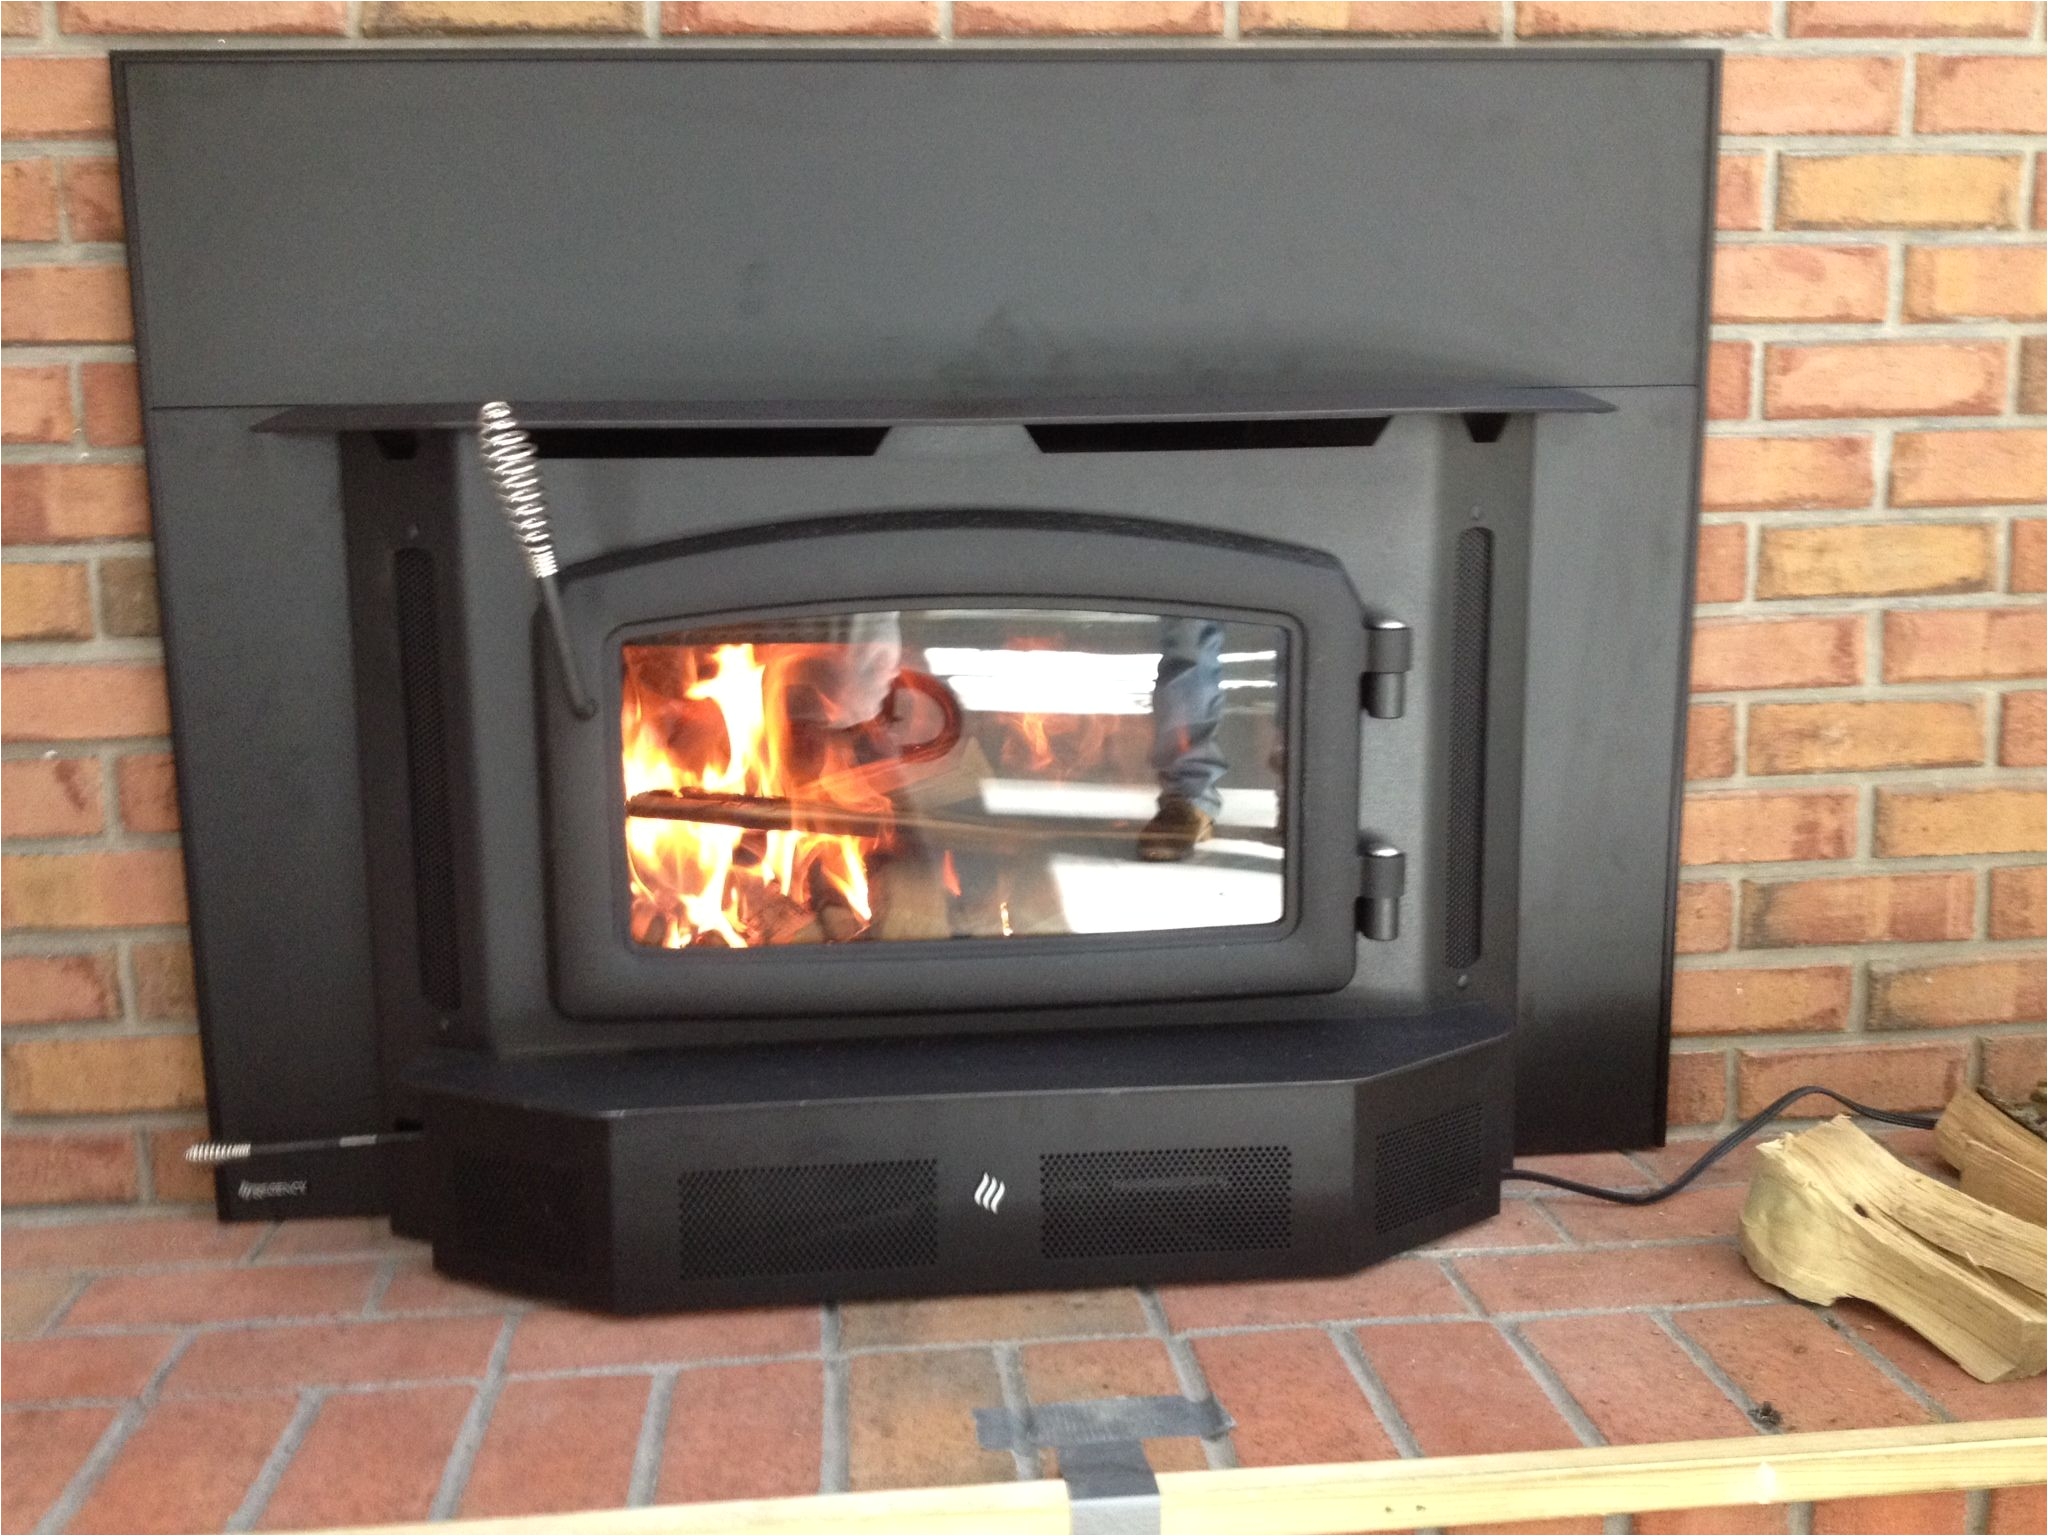 Different Types Of Wood Burning Fireplaces I3100 Wood Insert Woodinsert I3100 A1poolsandspas A1poolsct